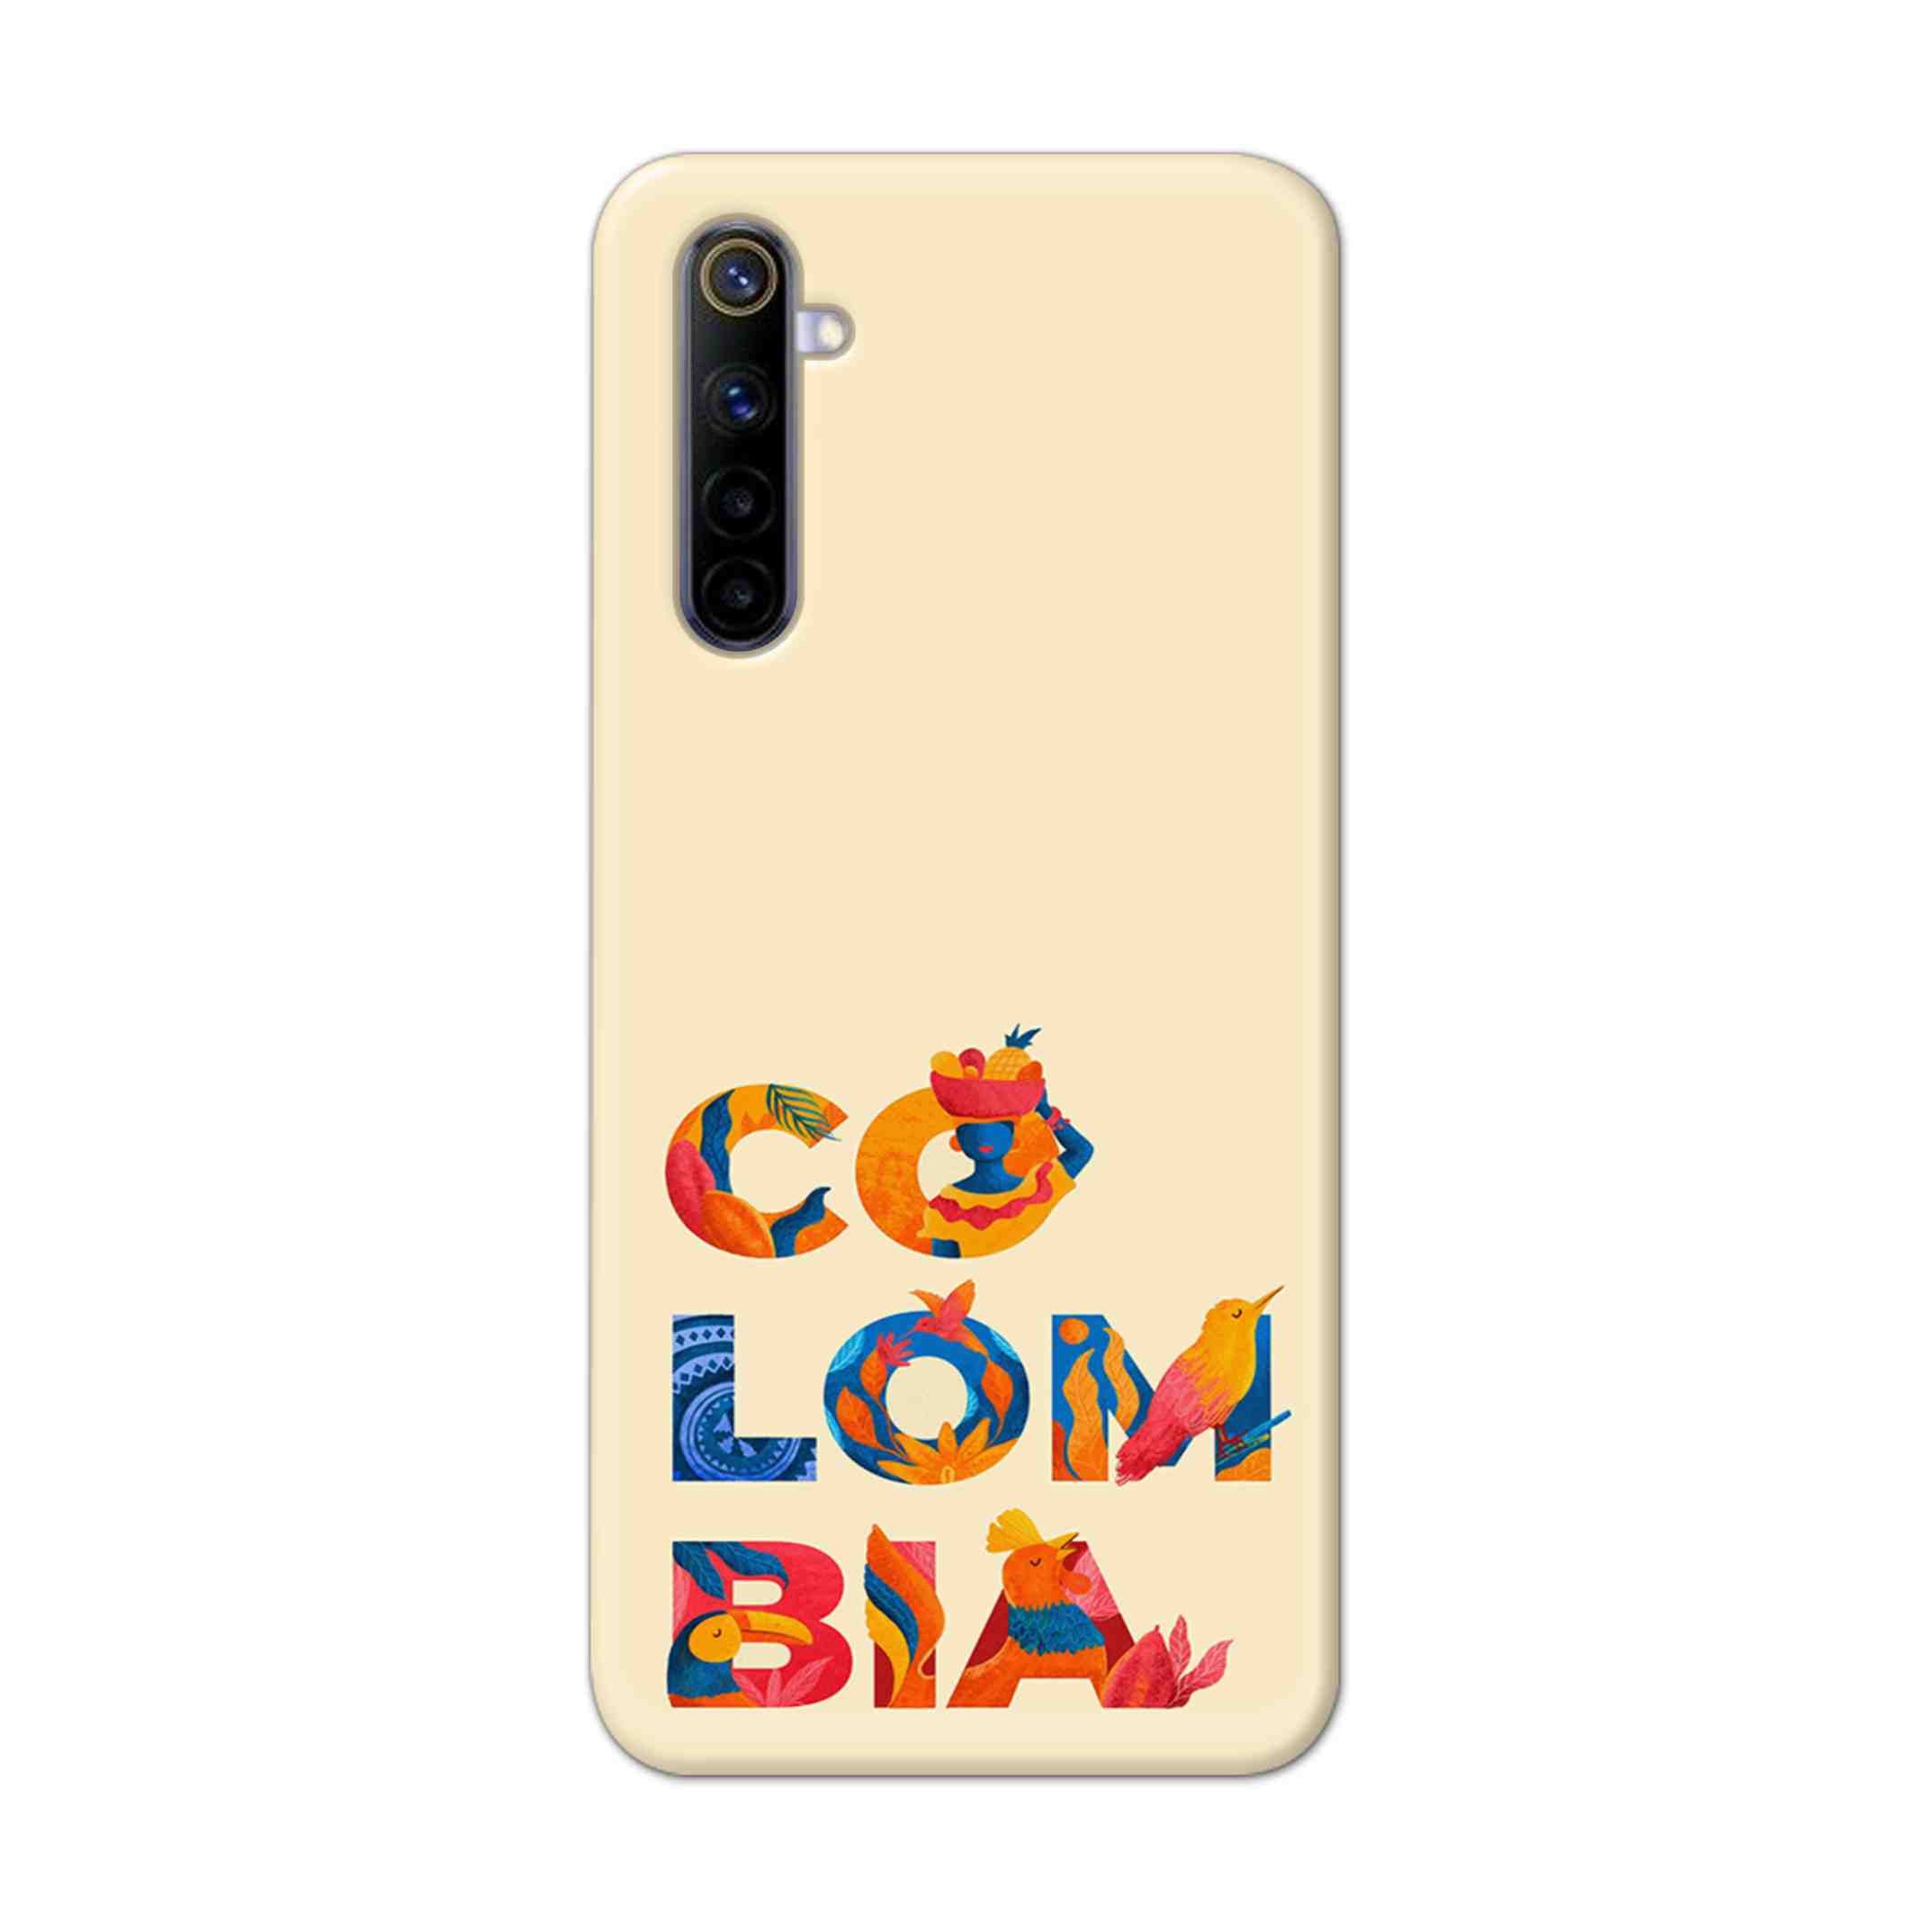 Buy Colombia Hard Back Mobile Phone Case Cover For REALME 6 PRO Online